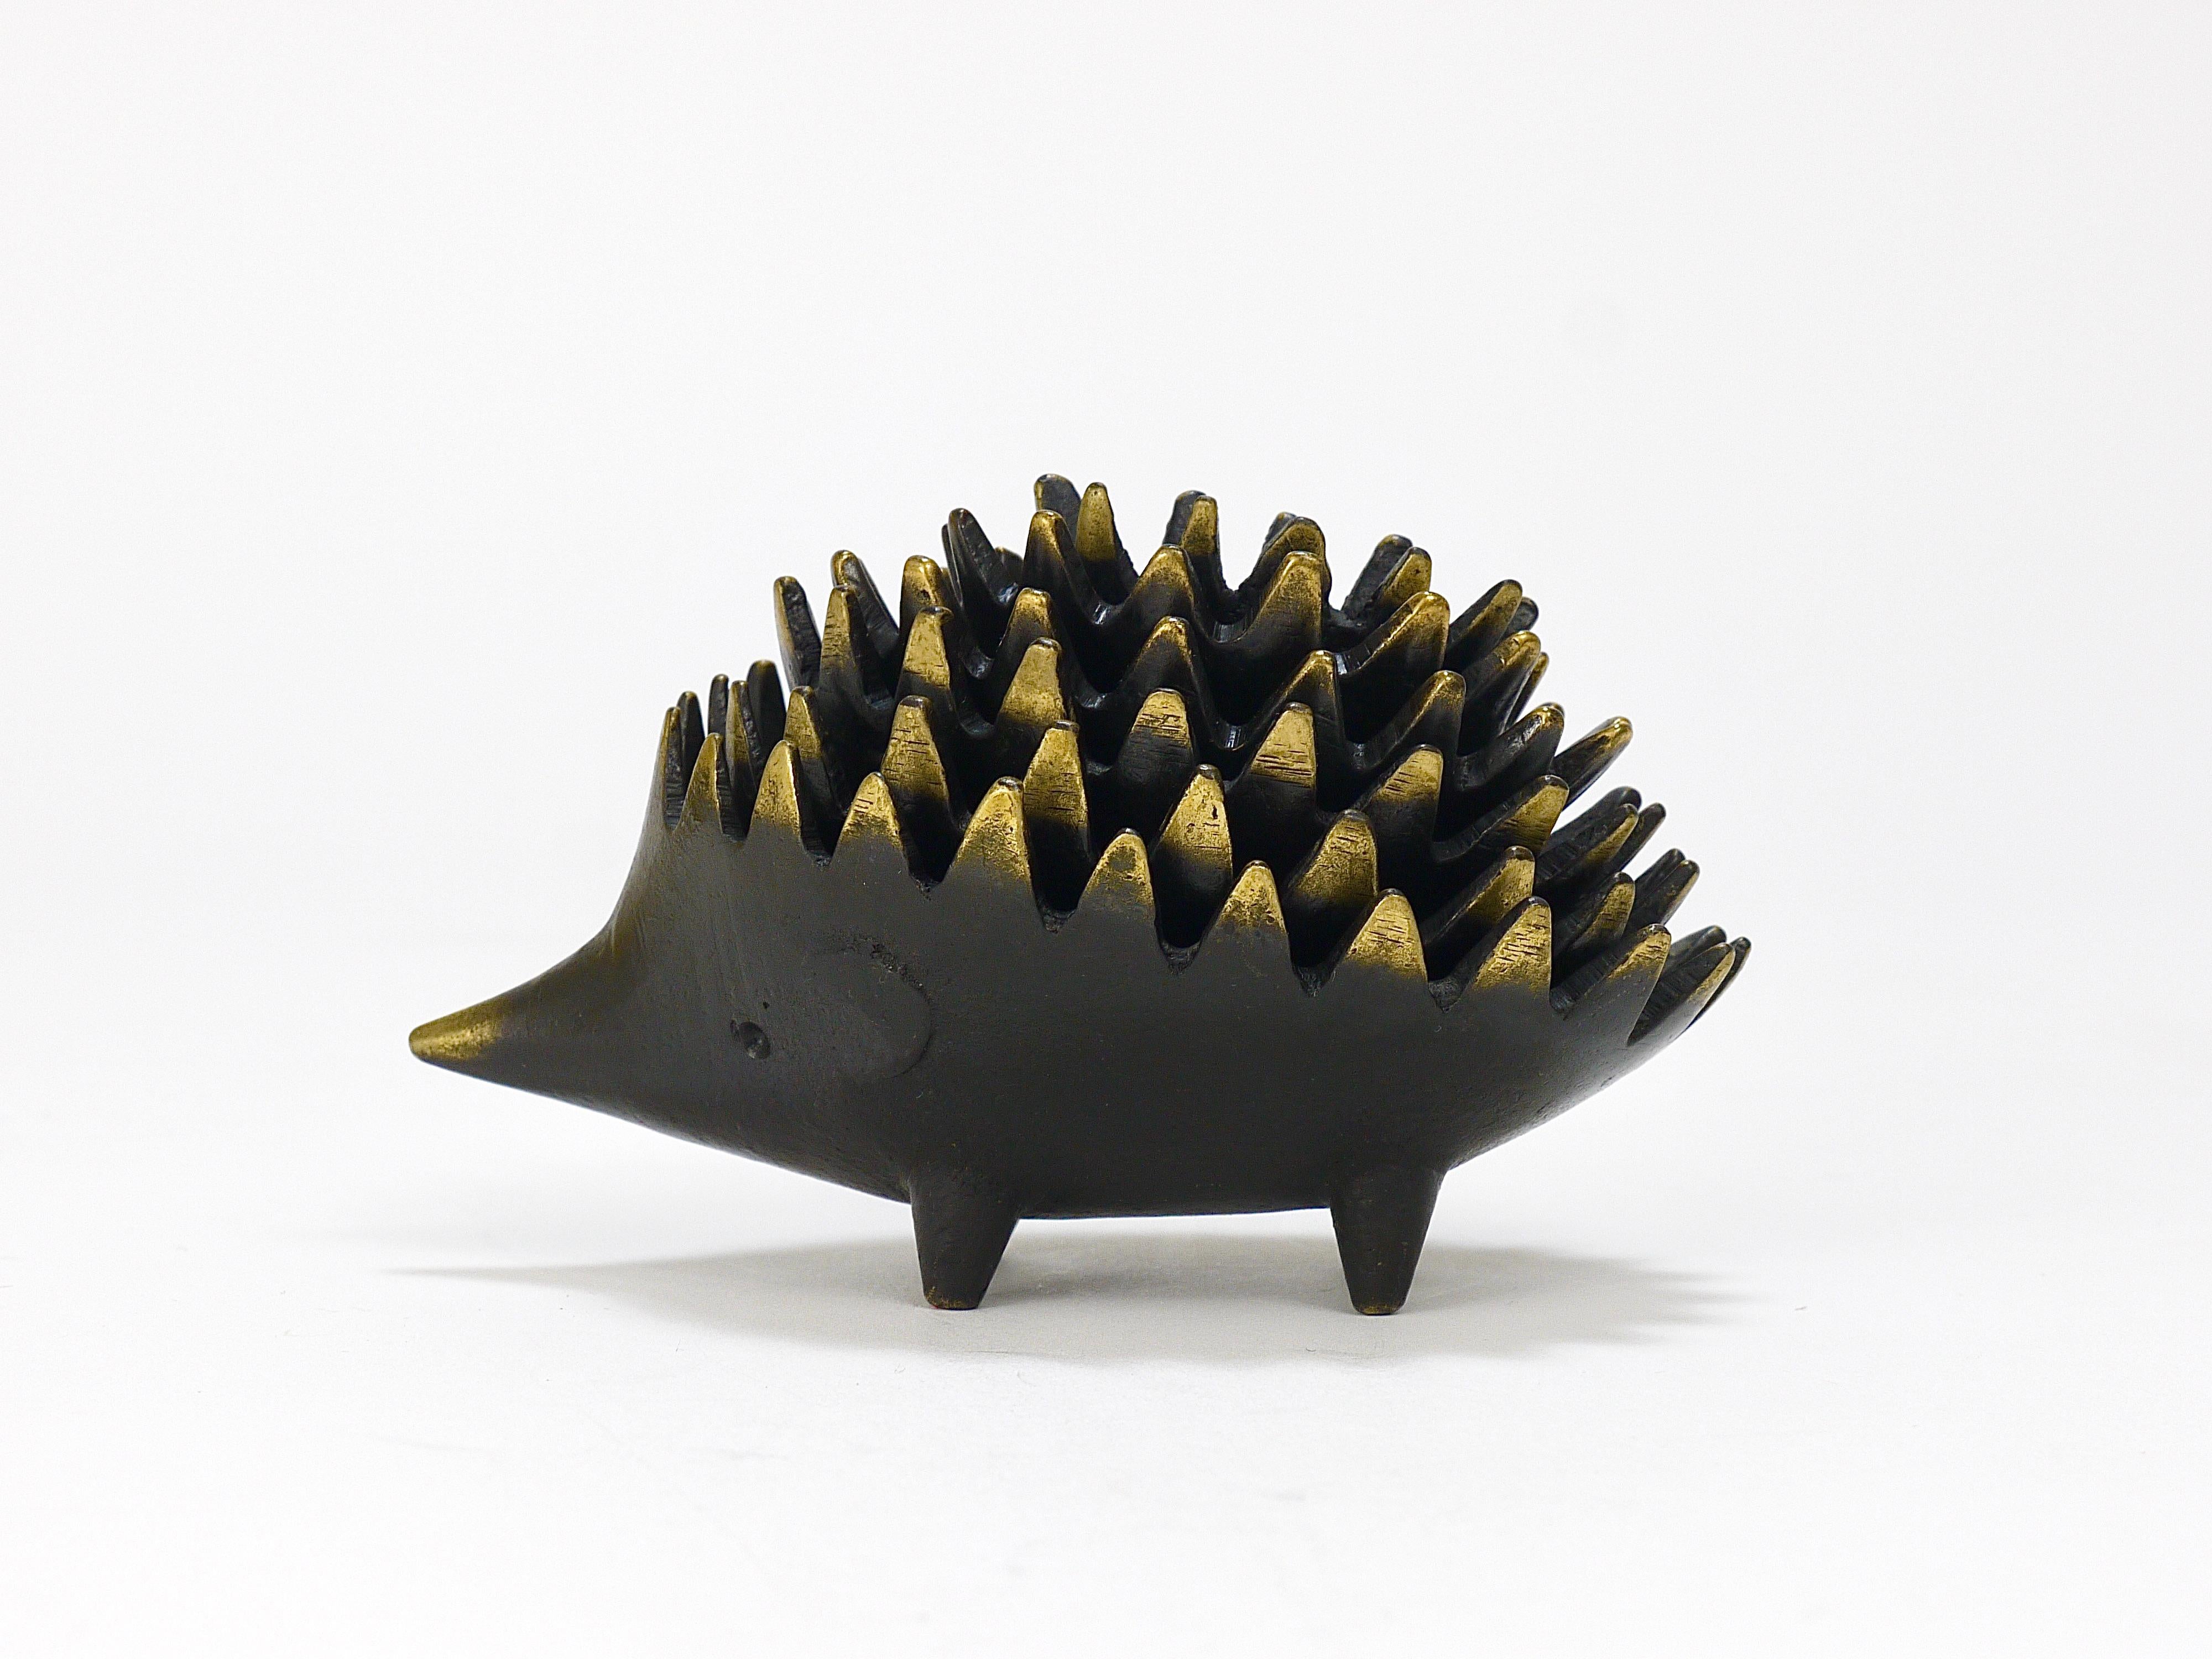 A complete set of six vintage stackable midcentury hedgehog ashtrays. A very humorous and charming design by Walter Bosse, executed by Hertha Baller, Austria in the 1950s. Made of brass, in remarkable above-average good condition.